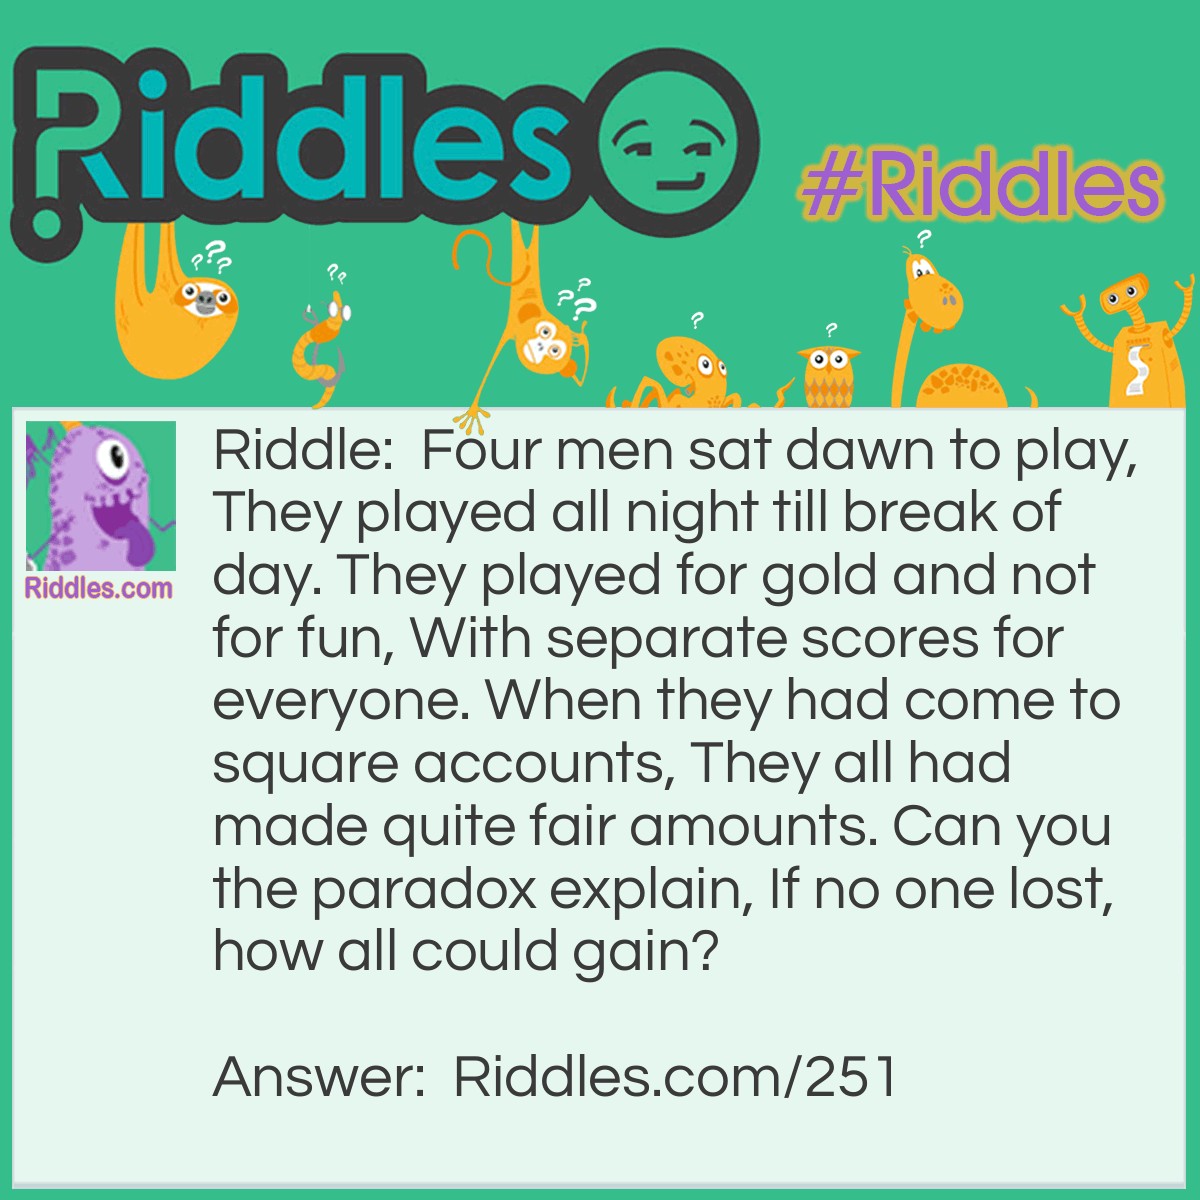 Riddle: Four men sat dawn to play, They played all night till break of day. They played for gold and not for fun, With separate scores for everyone. When they had come to square accounts, They all had made quite fair amounts. Can you the paradox explain, If no one lost, how all could gain? Answer: The men were musicians..